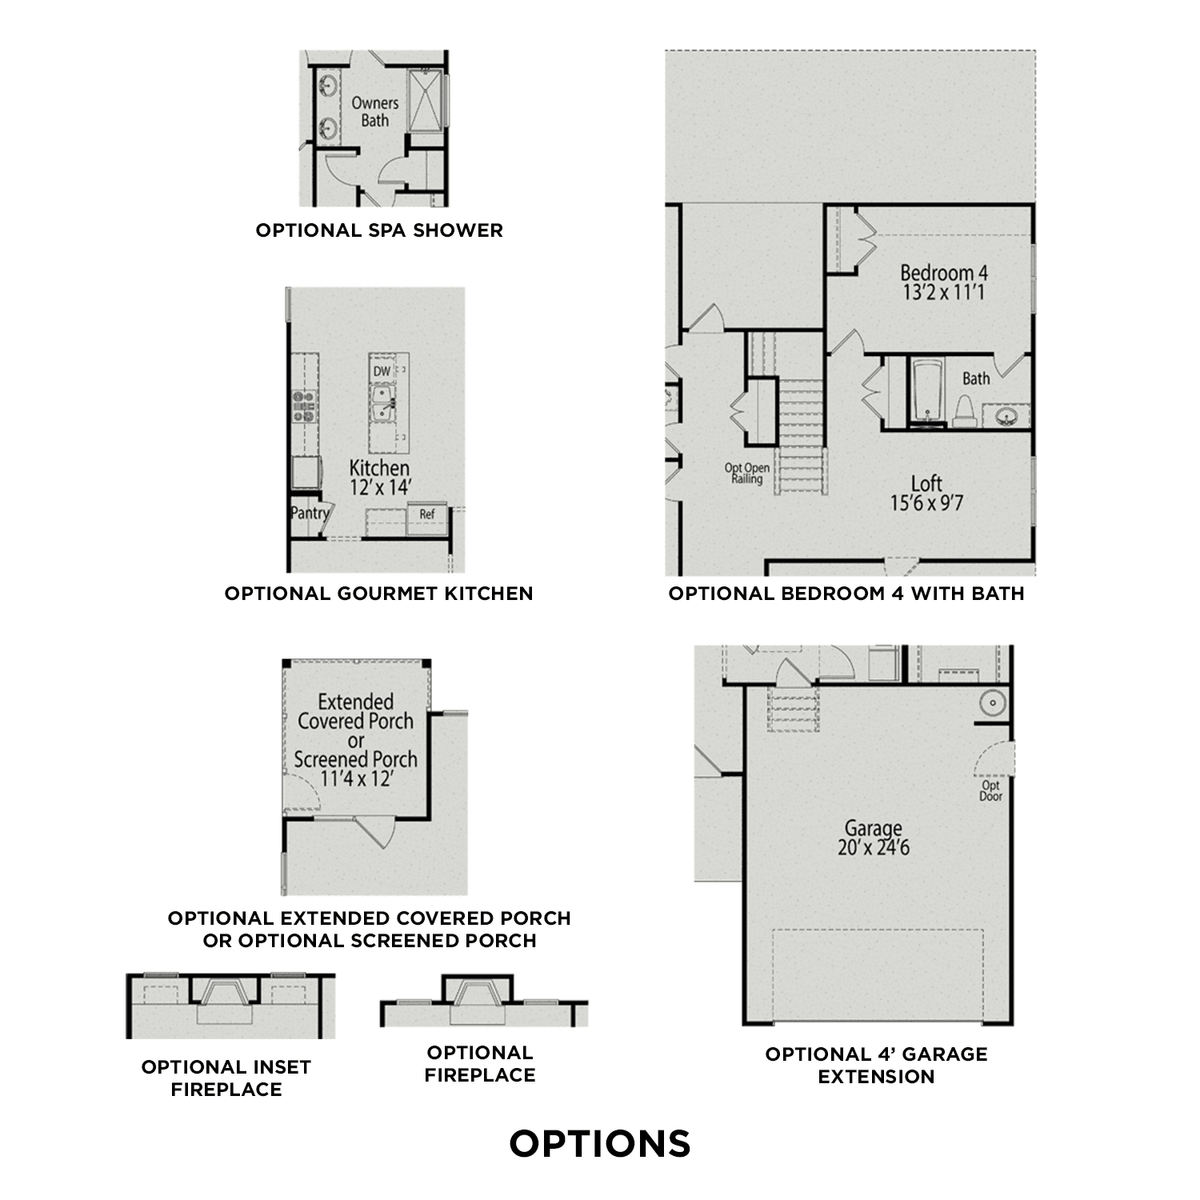 3 - The Ash B floor plan layout for 876 Barbour Farm Lane in Davidson Homes' Beverly Place community.